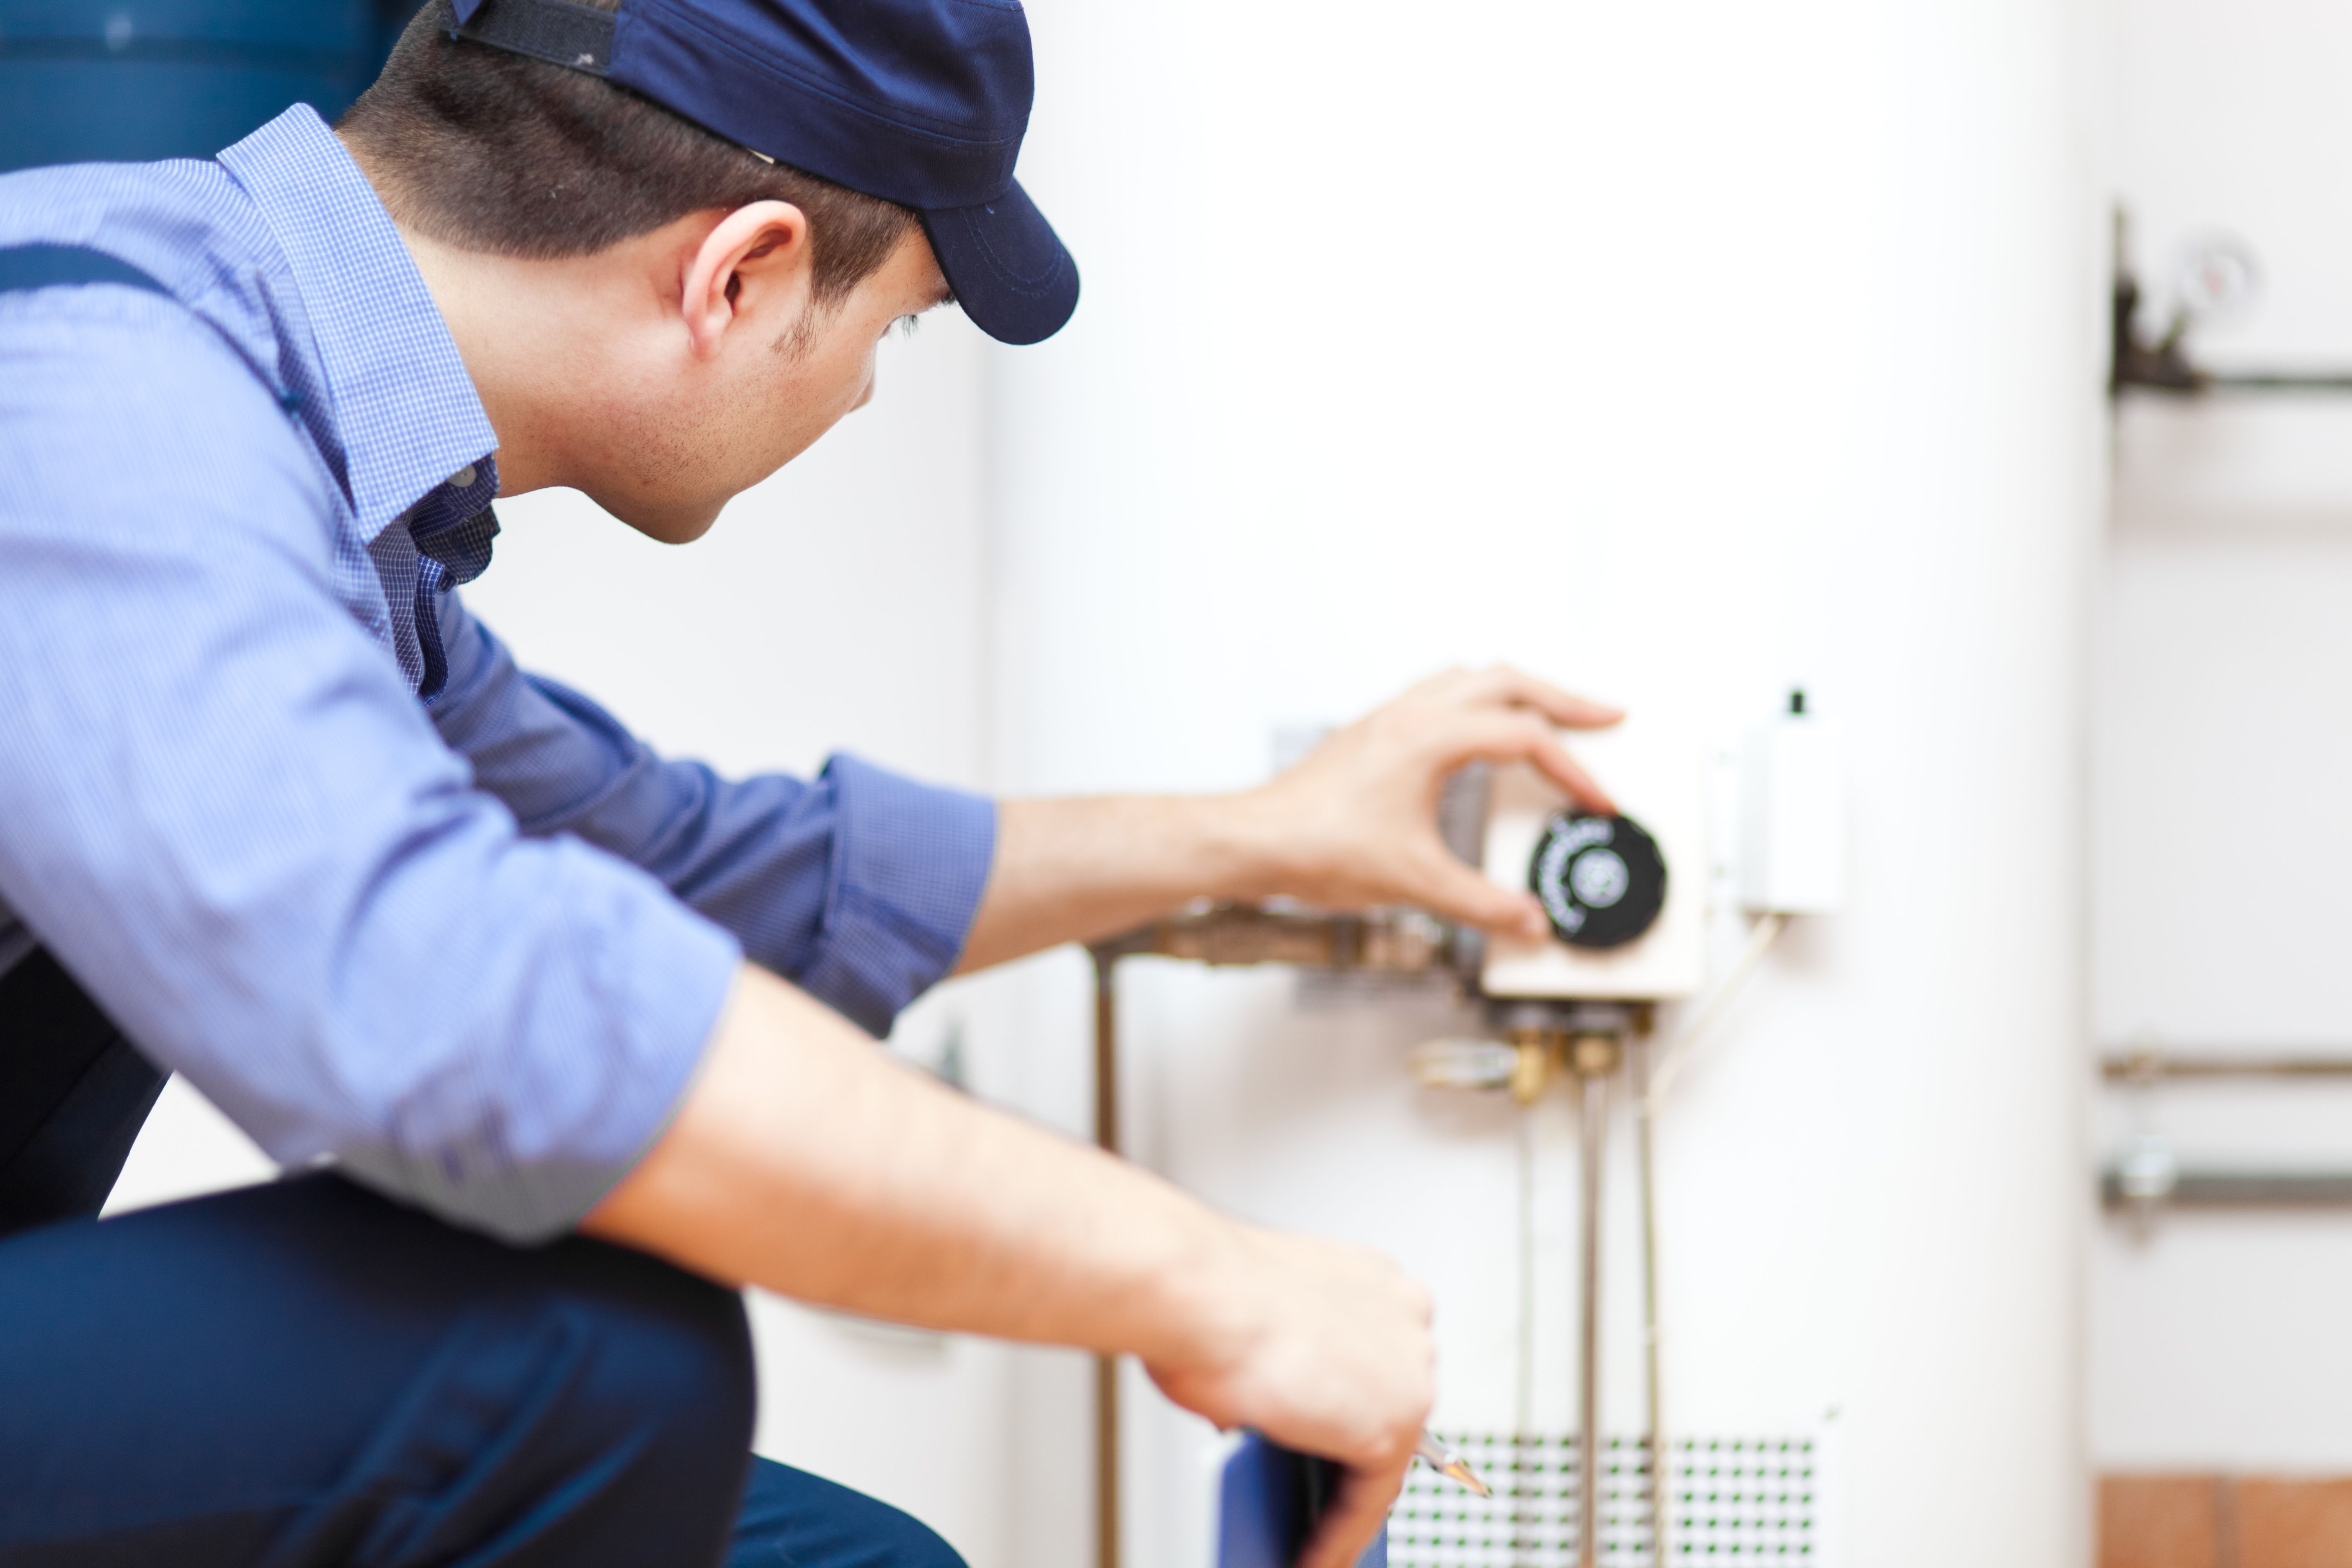 A plumber wearing a blue shirt and hat is adjusting the thermostat on a water heater